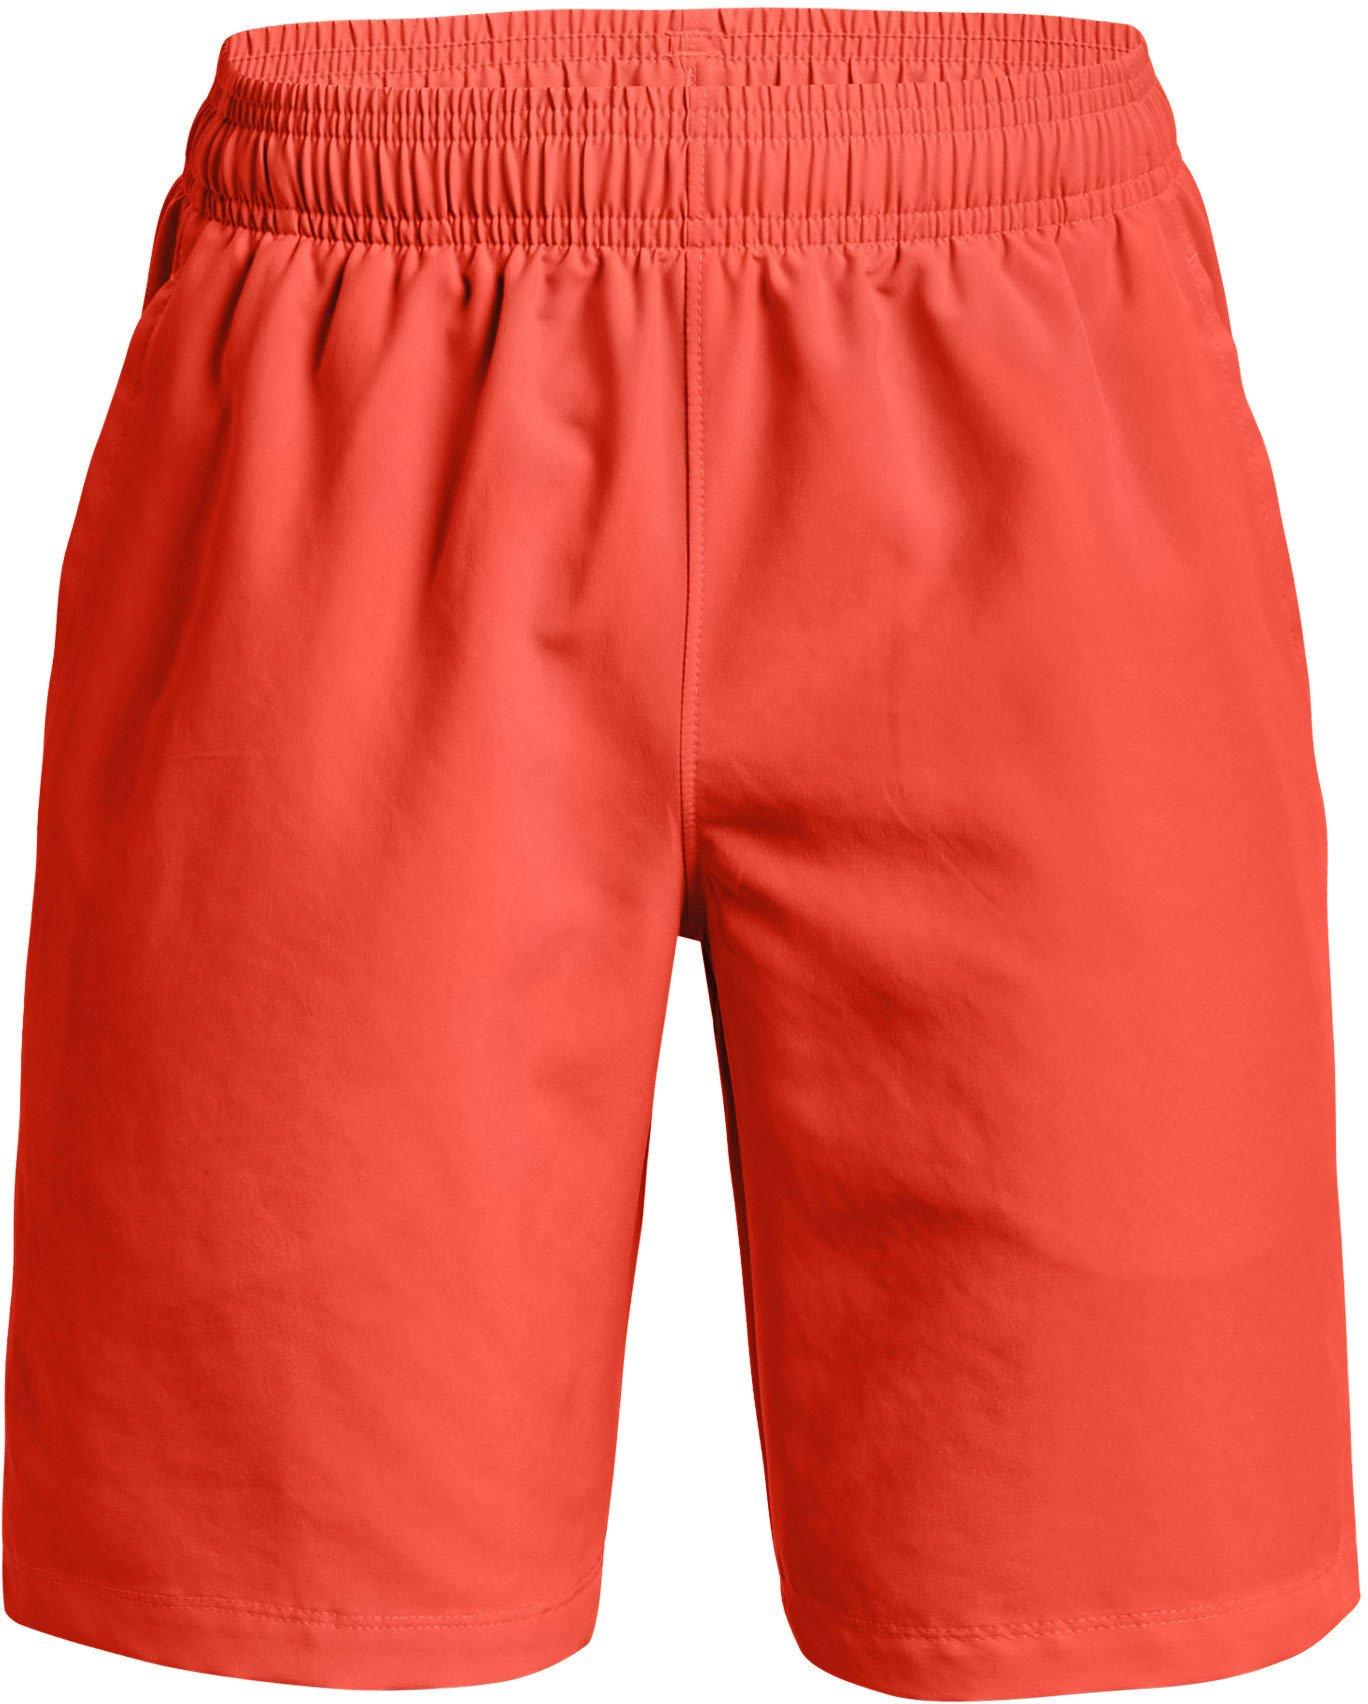 Under Armour Woven Graphic Shorts-ORG L